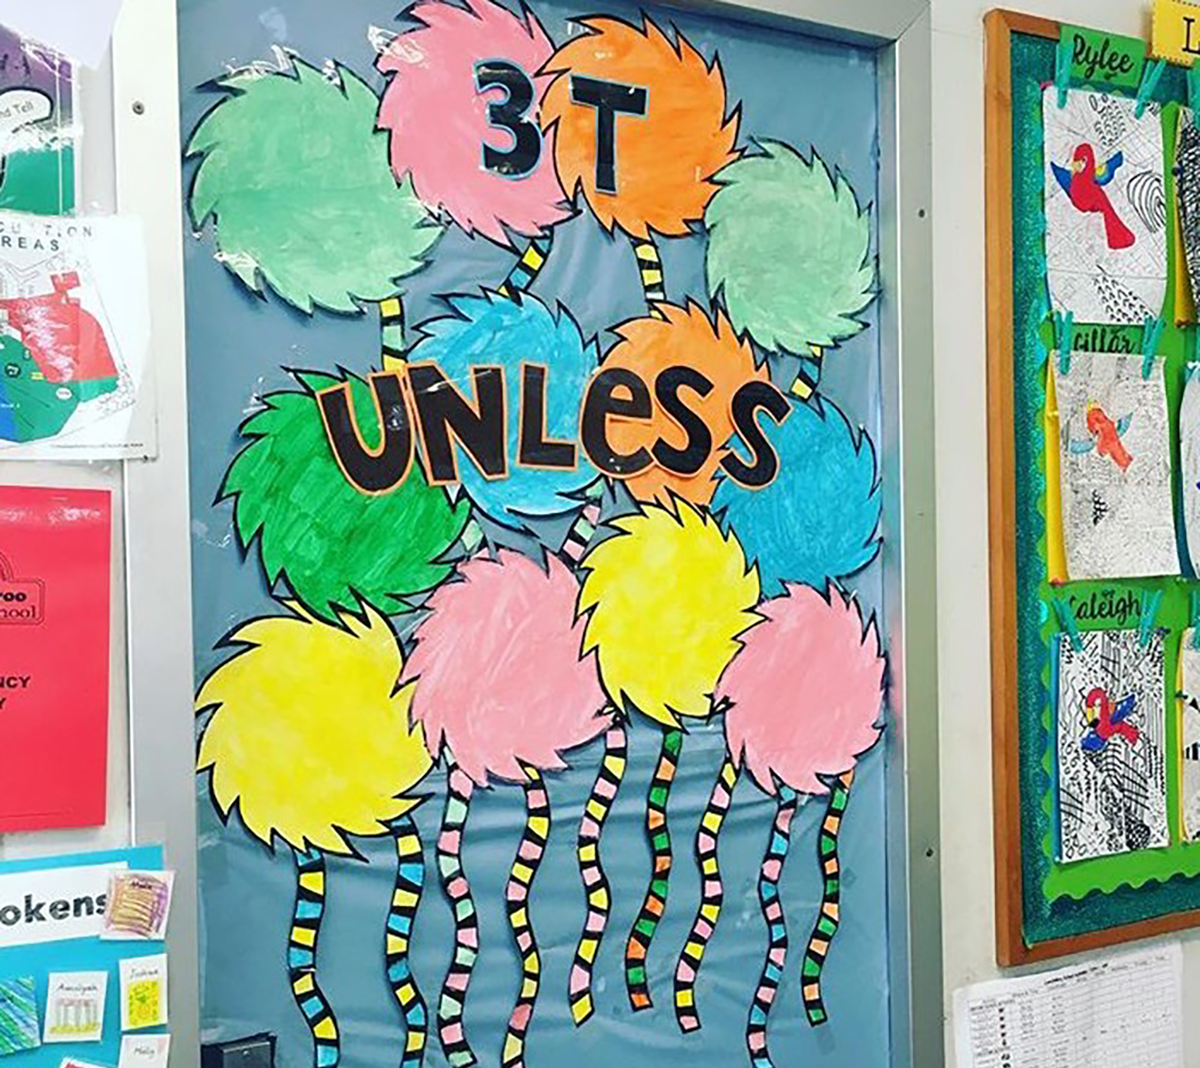 Grade 3 Classroom Display by Taylor Donnelly